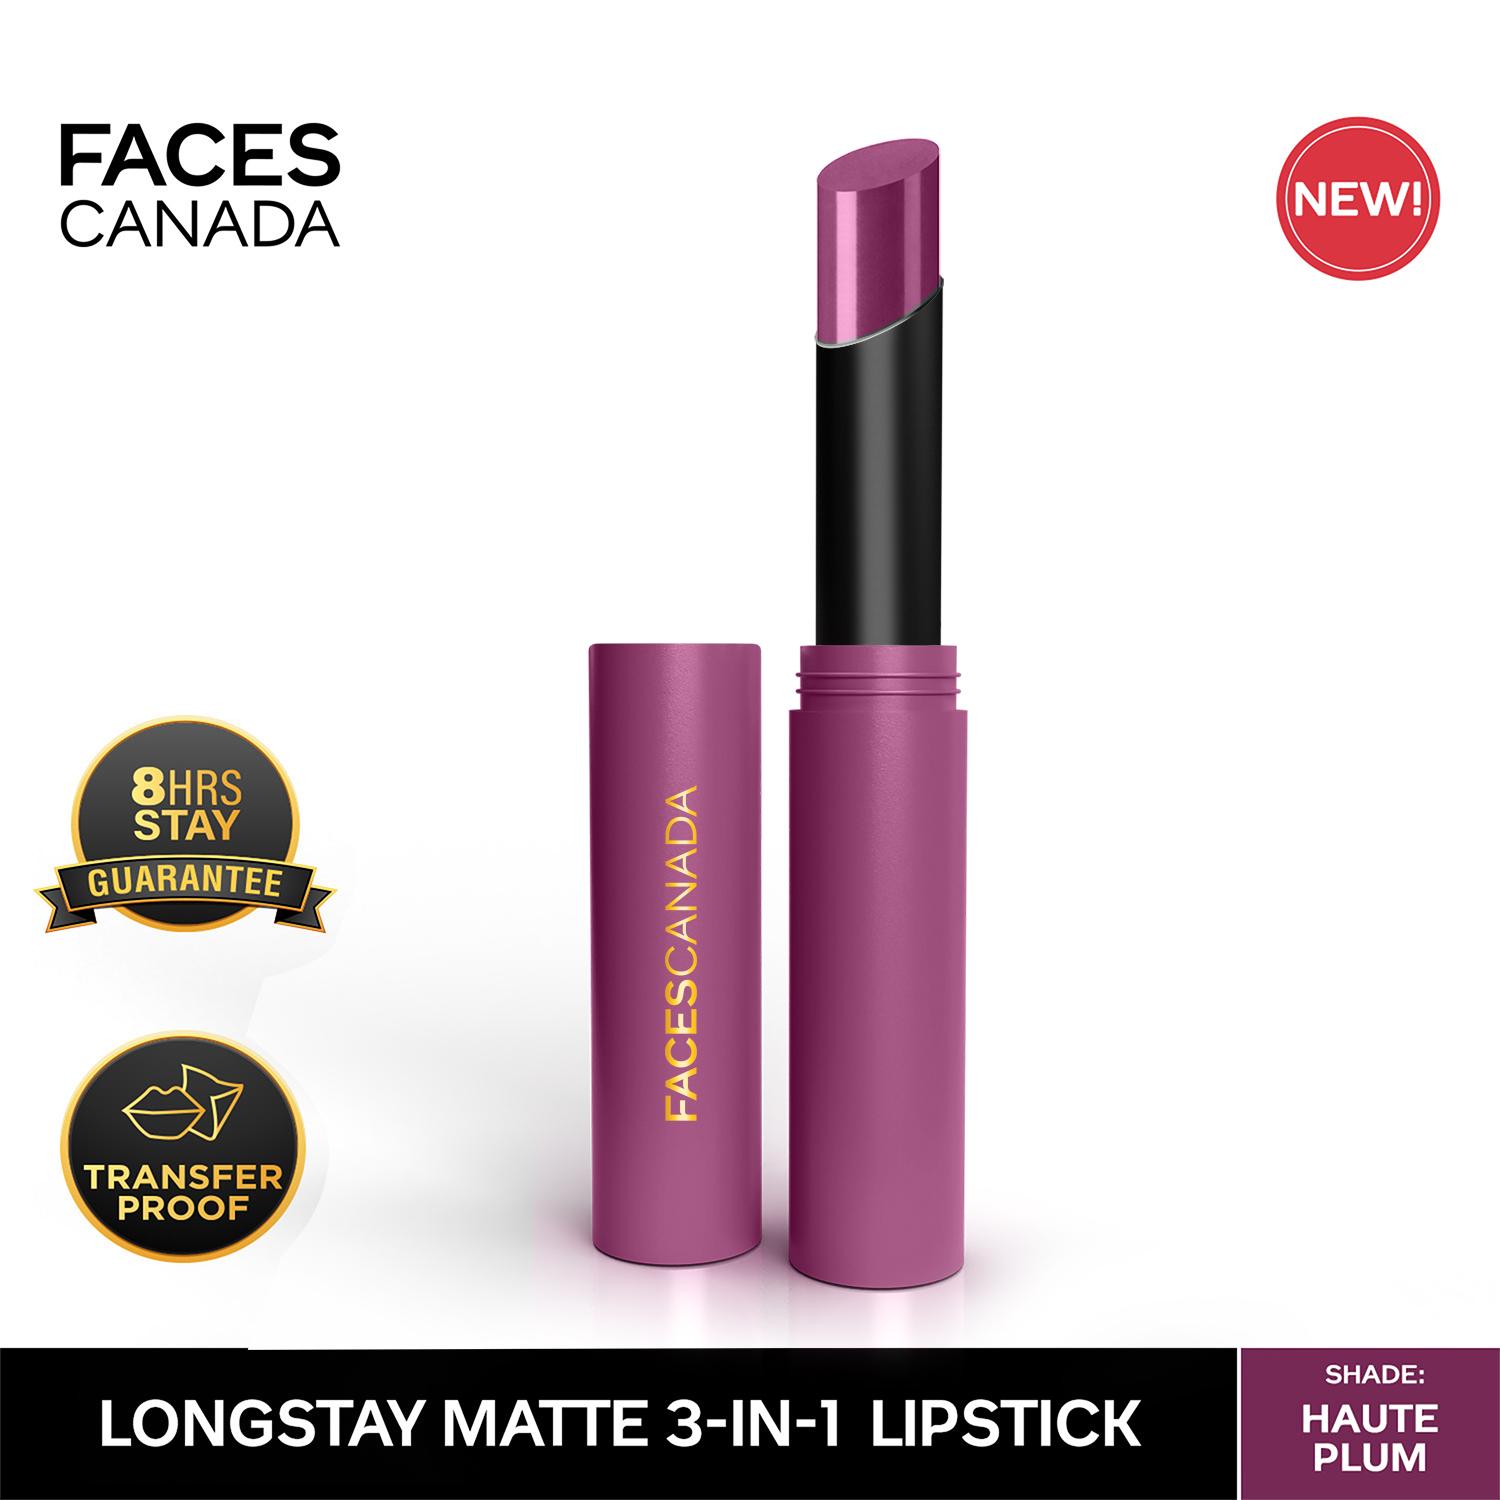 Faces Canada | Faces Canada Long Stay 3-in-1 Matte Lipstick - Haute Plum 08, 8HR Stay, Primer-Infused (2 g)